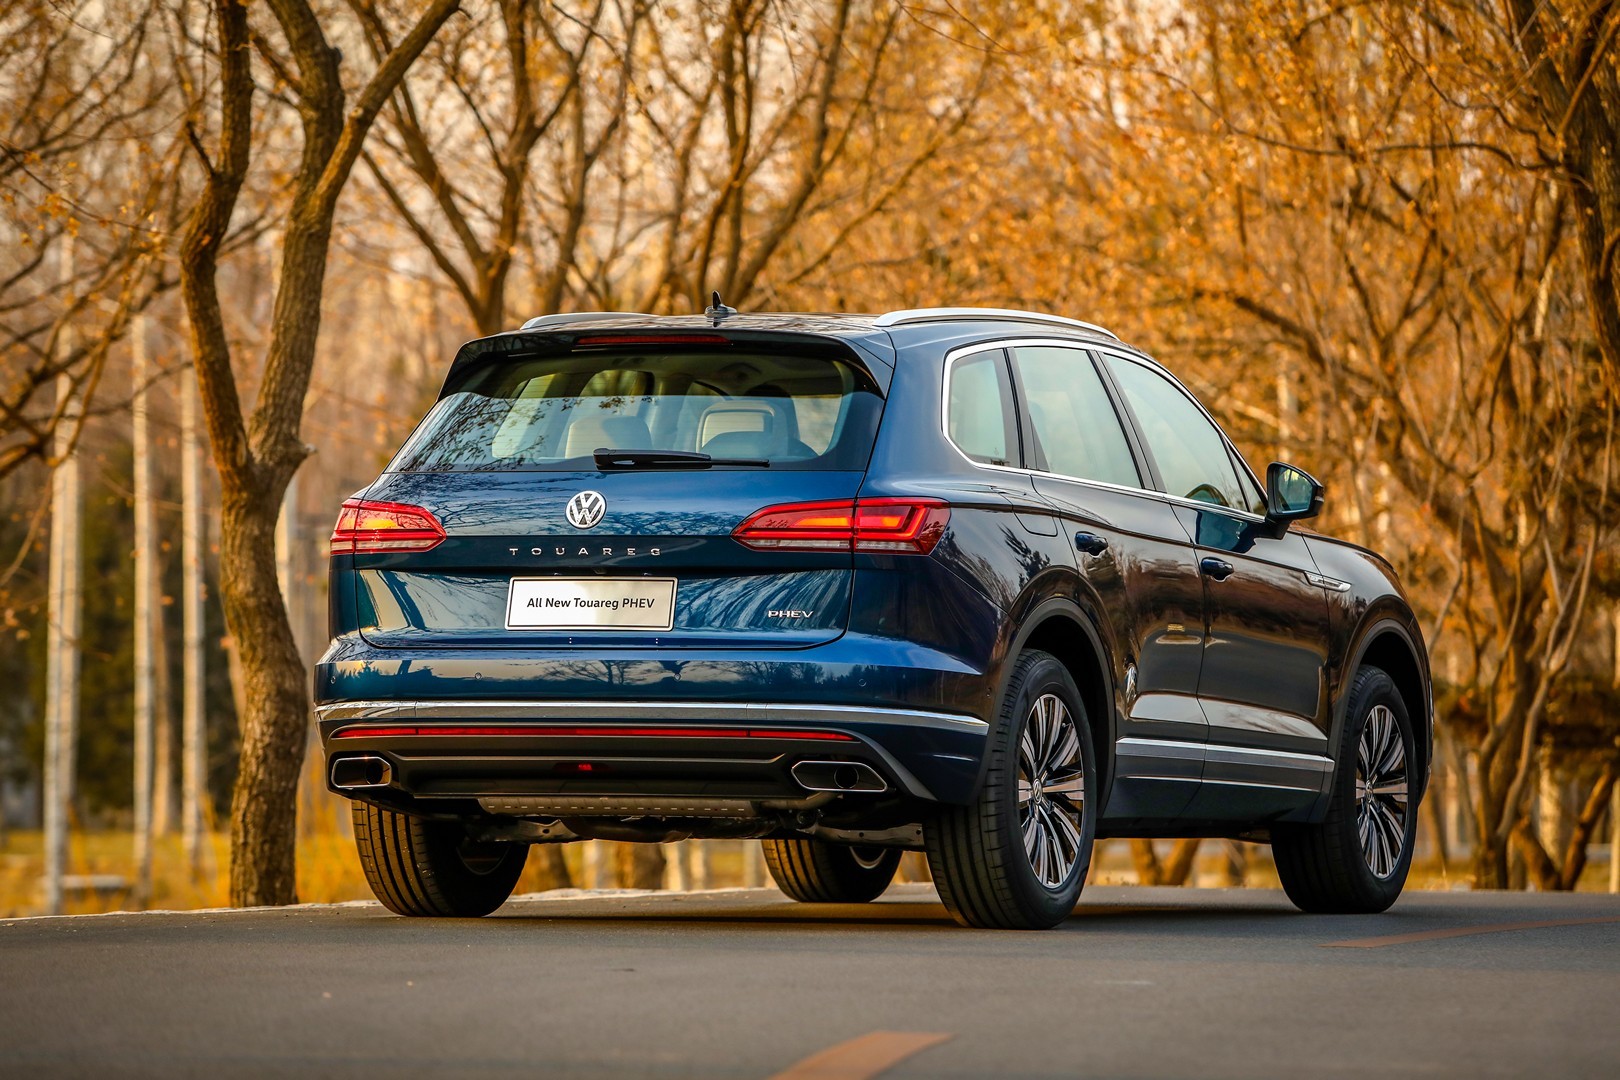 New Volkswagen Touareg Phev Debuts With 367 Hp 2 Liter Turbo System